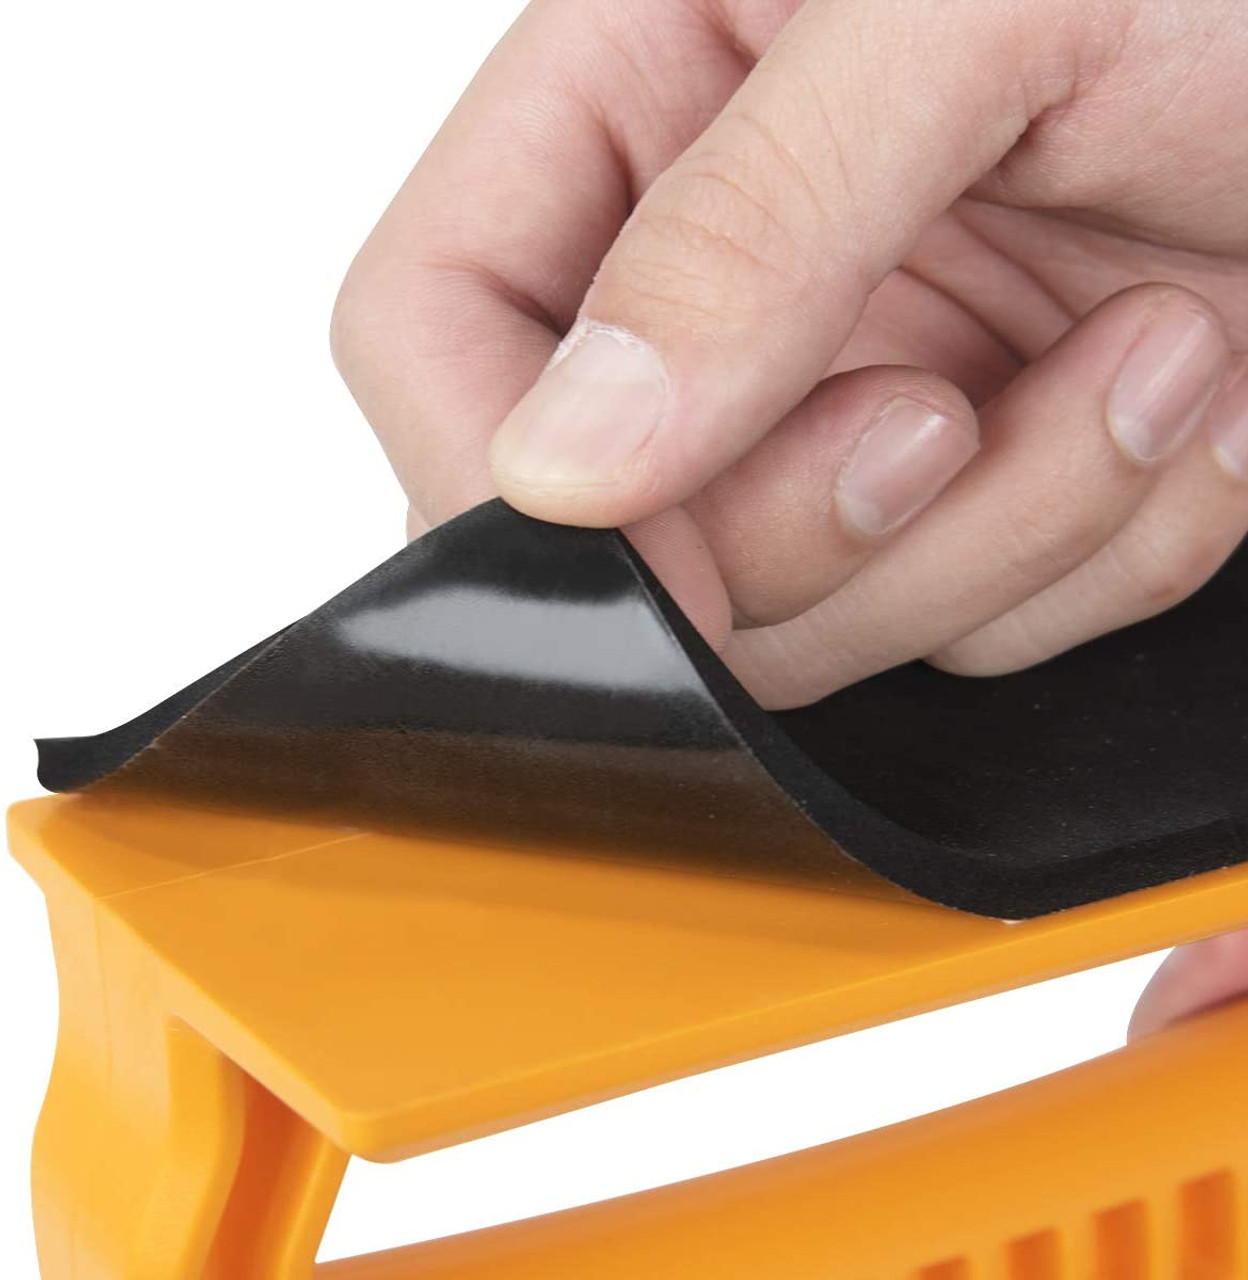 https://cdn11.bigcommerce.com/s-yh2g6i/images/stencil/1280x1280/products/1815/6363/71556_EPDM_Rubber_Self_-Adhesive_Push_Block_Replacement_Pad_for_POWERTEC_71339-1__43178.1660124253.jpg?c=2